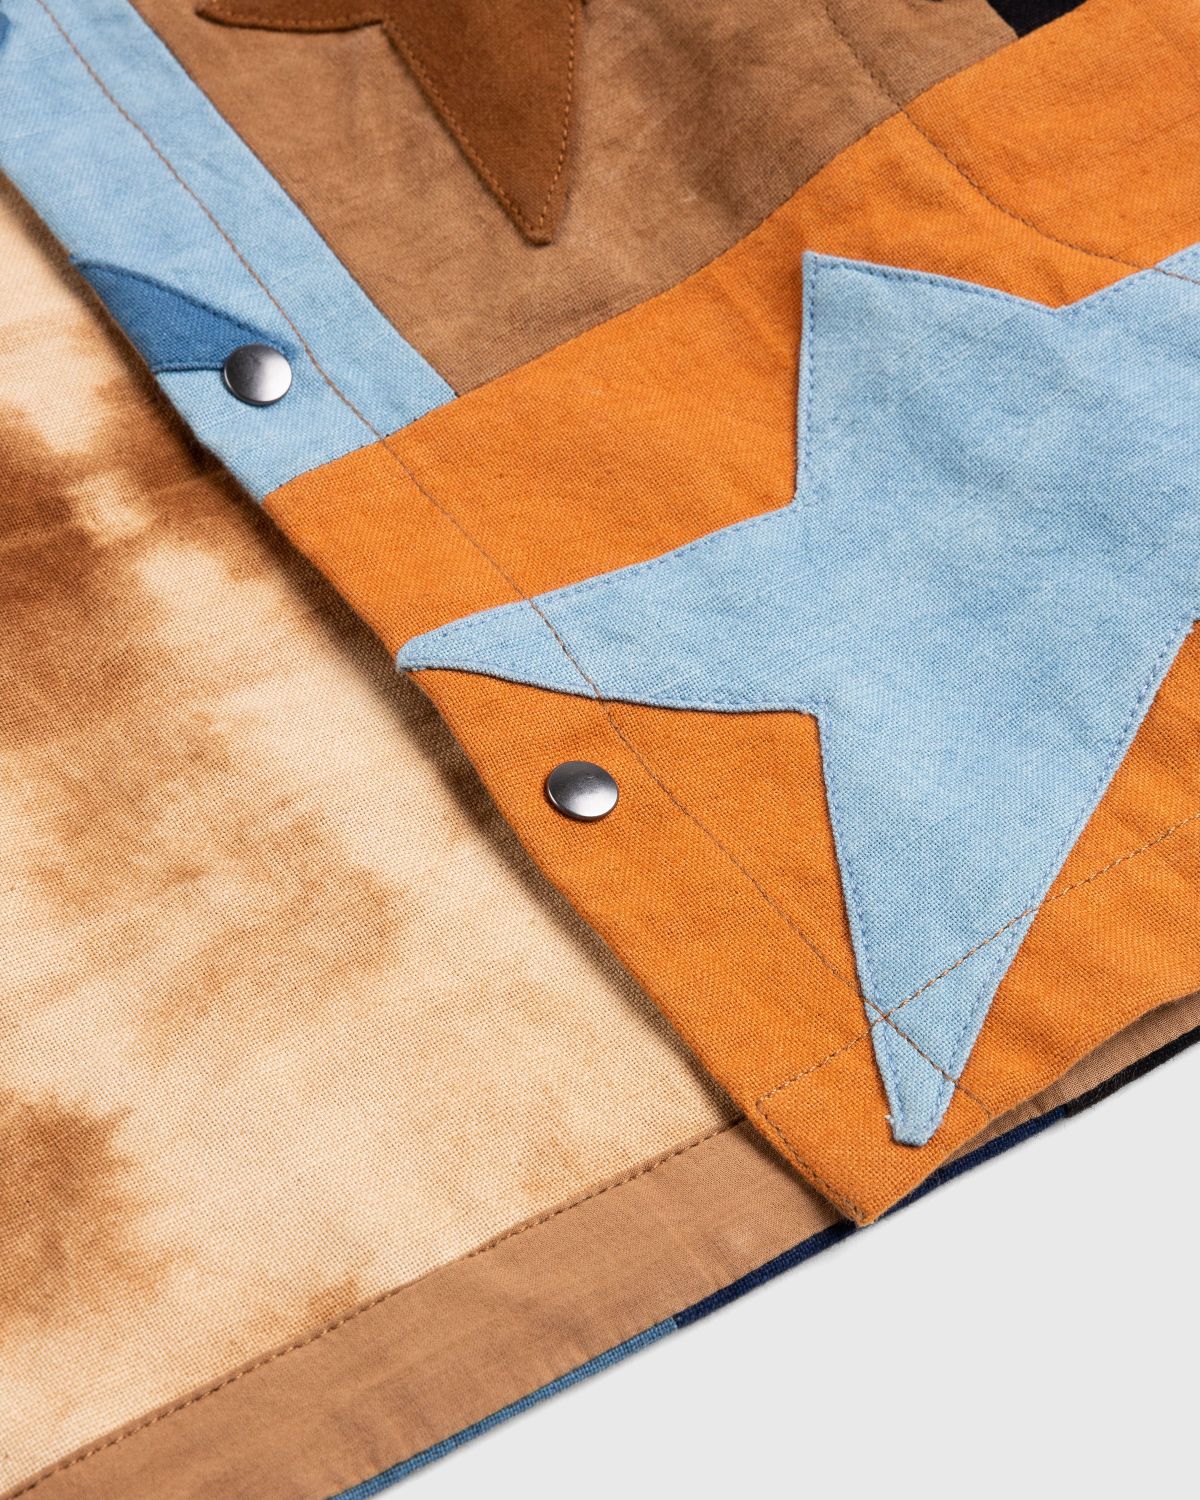 Story mfg. – Worf Jacket Star Scraps Patchwork - Outerwear - Multi - Image 5